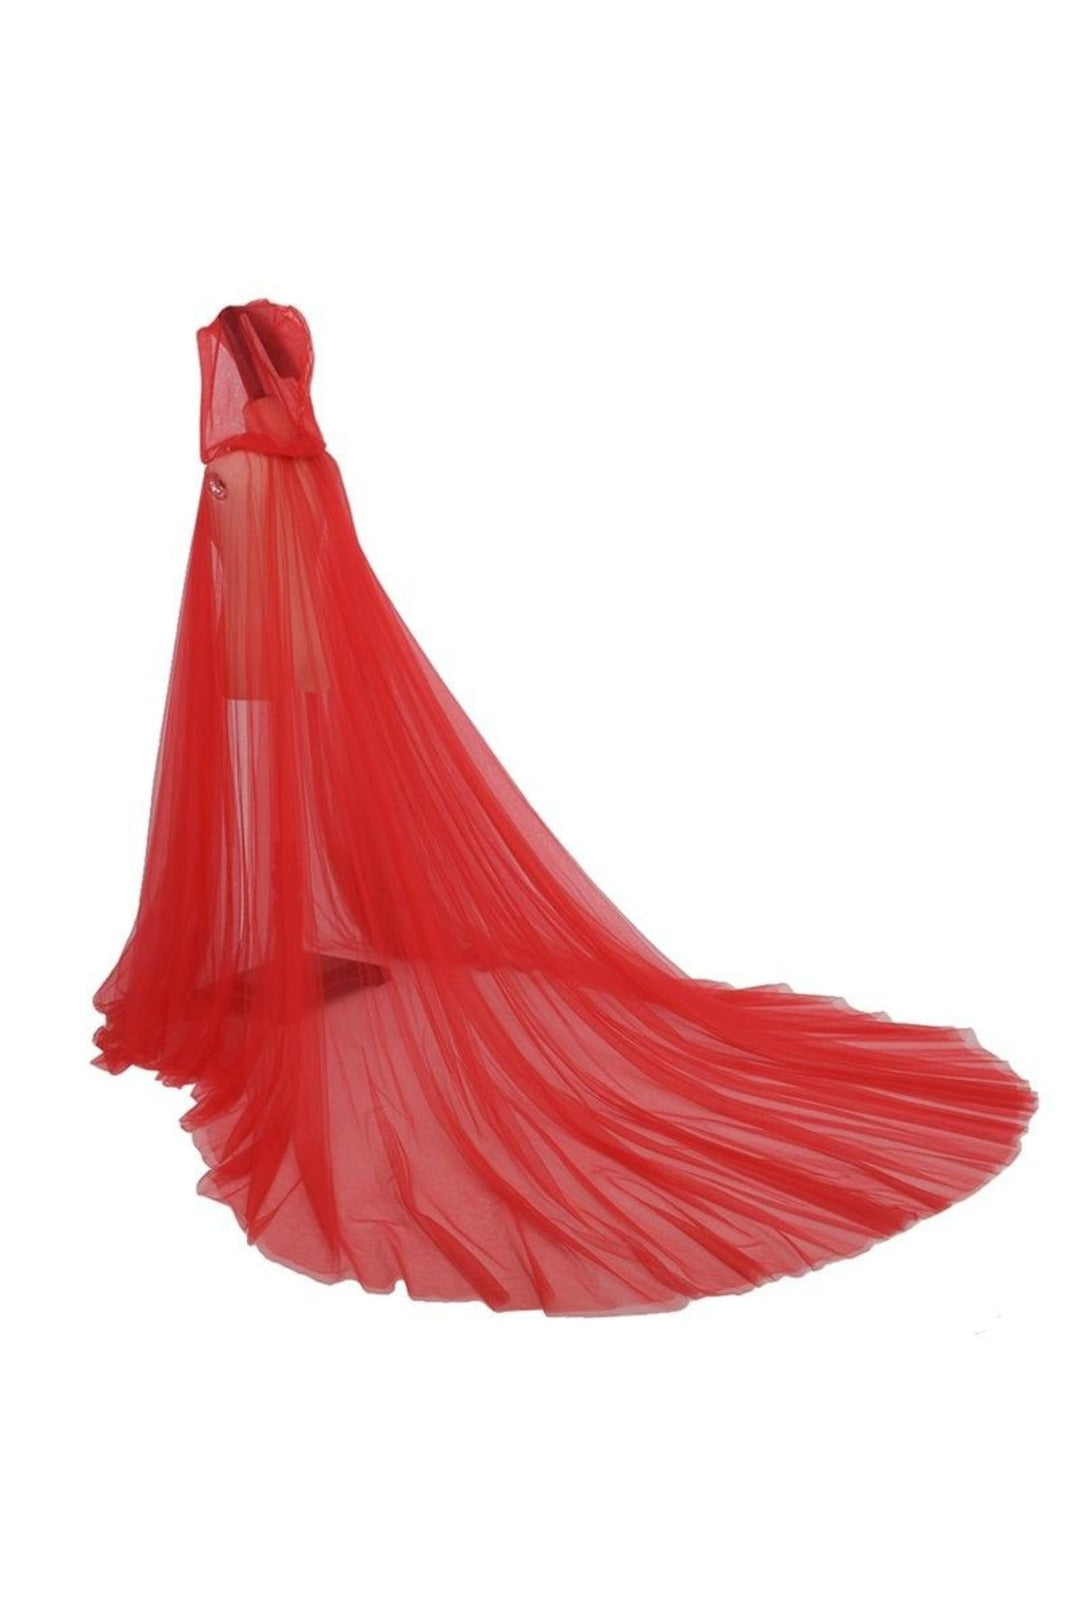 Red Tulle Hooded Cloak with Train